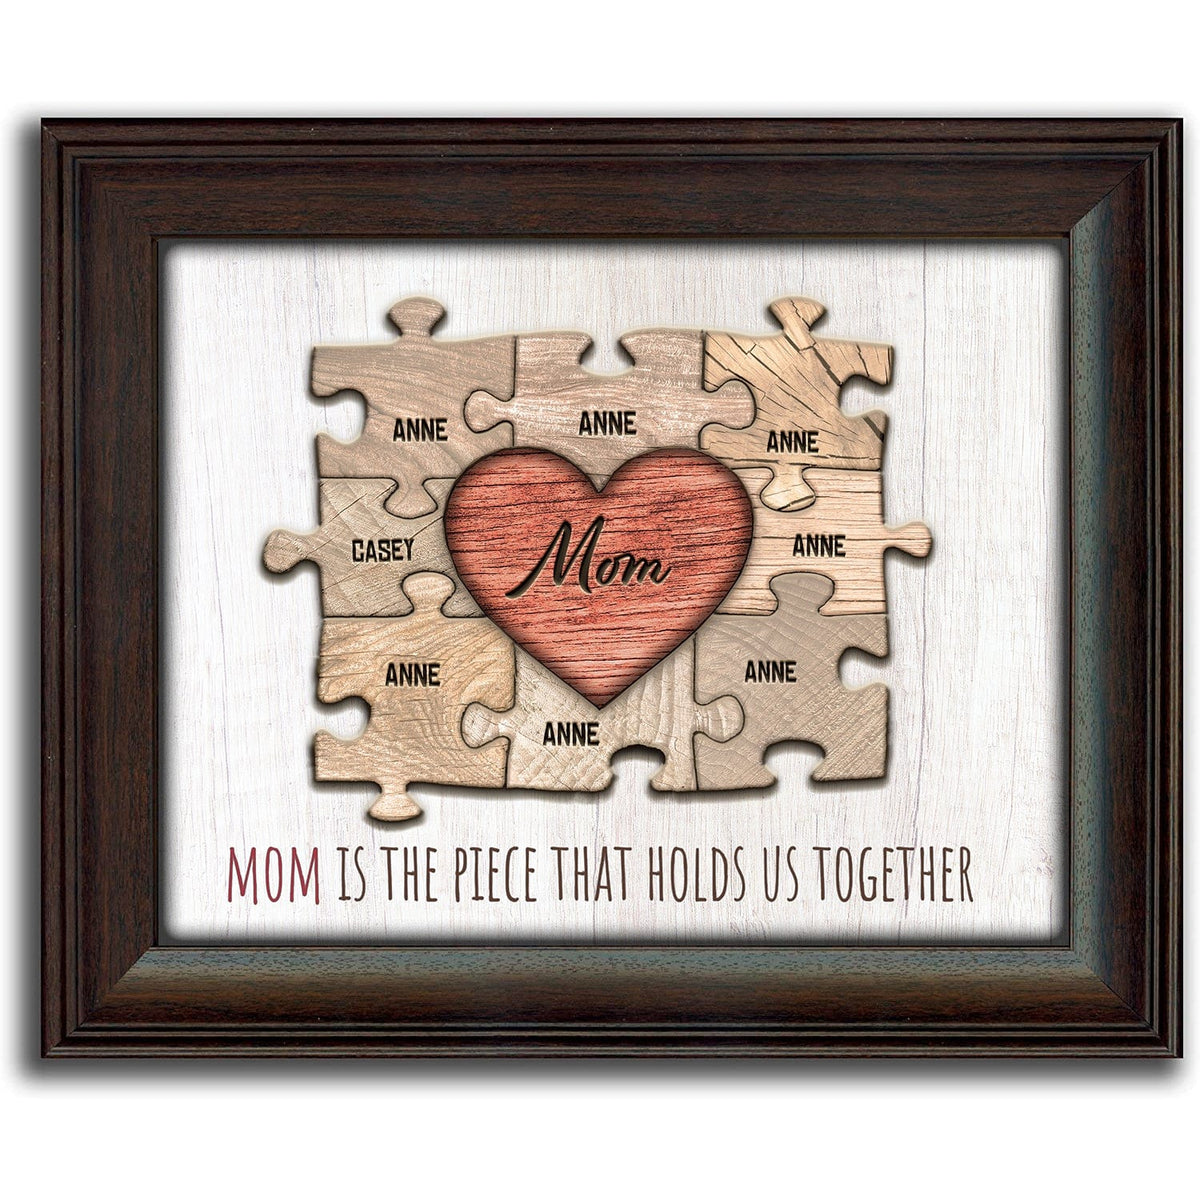 Personalized Art Gift for Mom with Names on puzzle pieces in the art